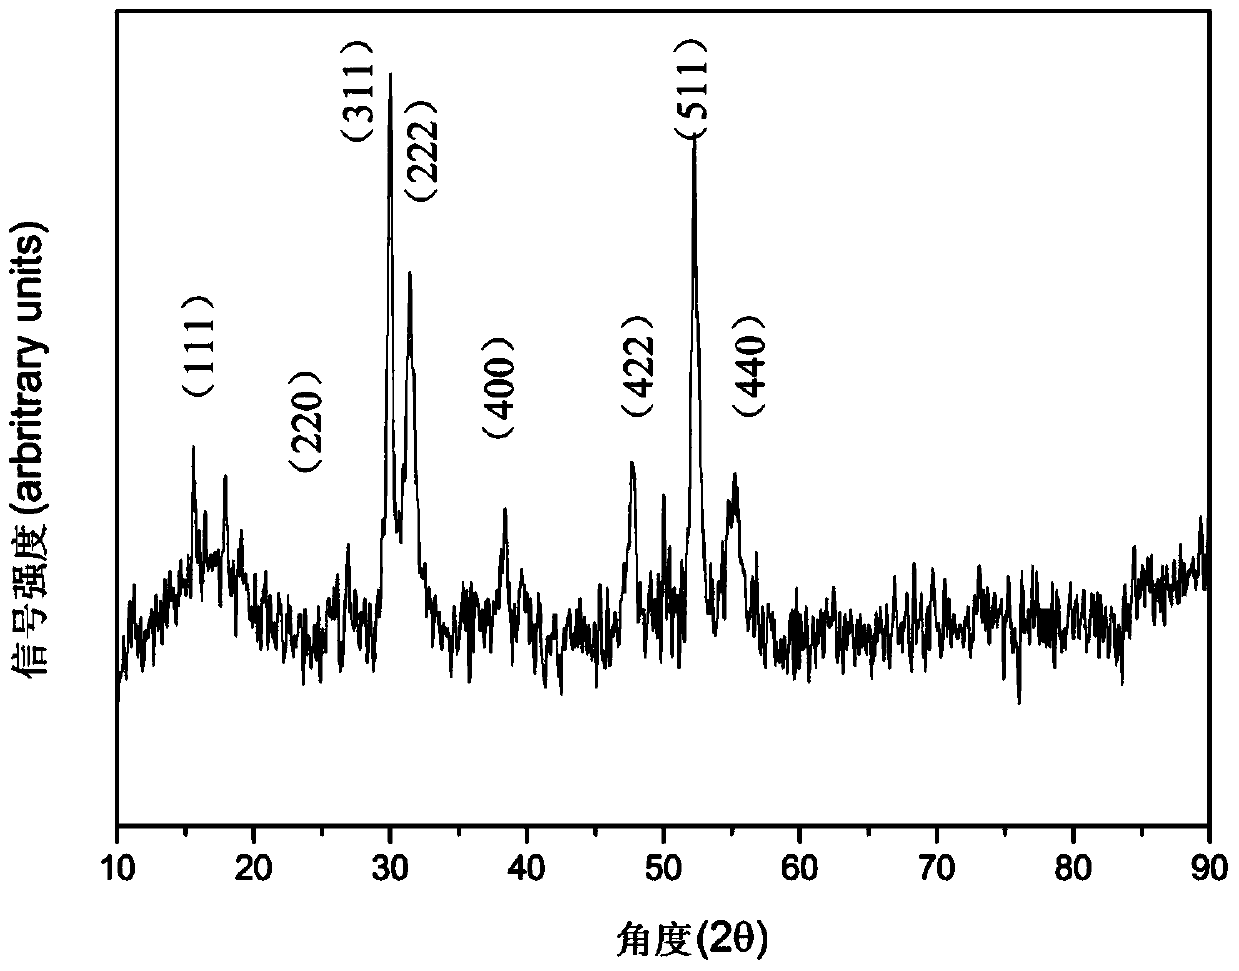 Sea urchin like NiCo2S4 electrode material solvothermal synthesis method